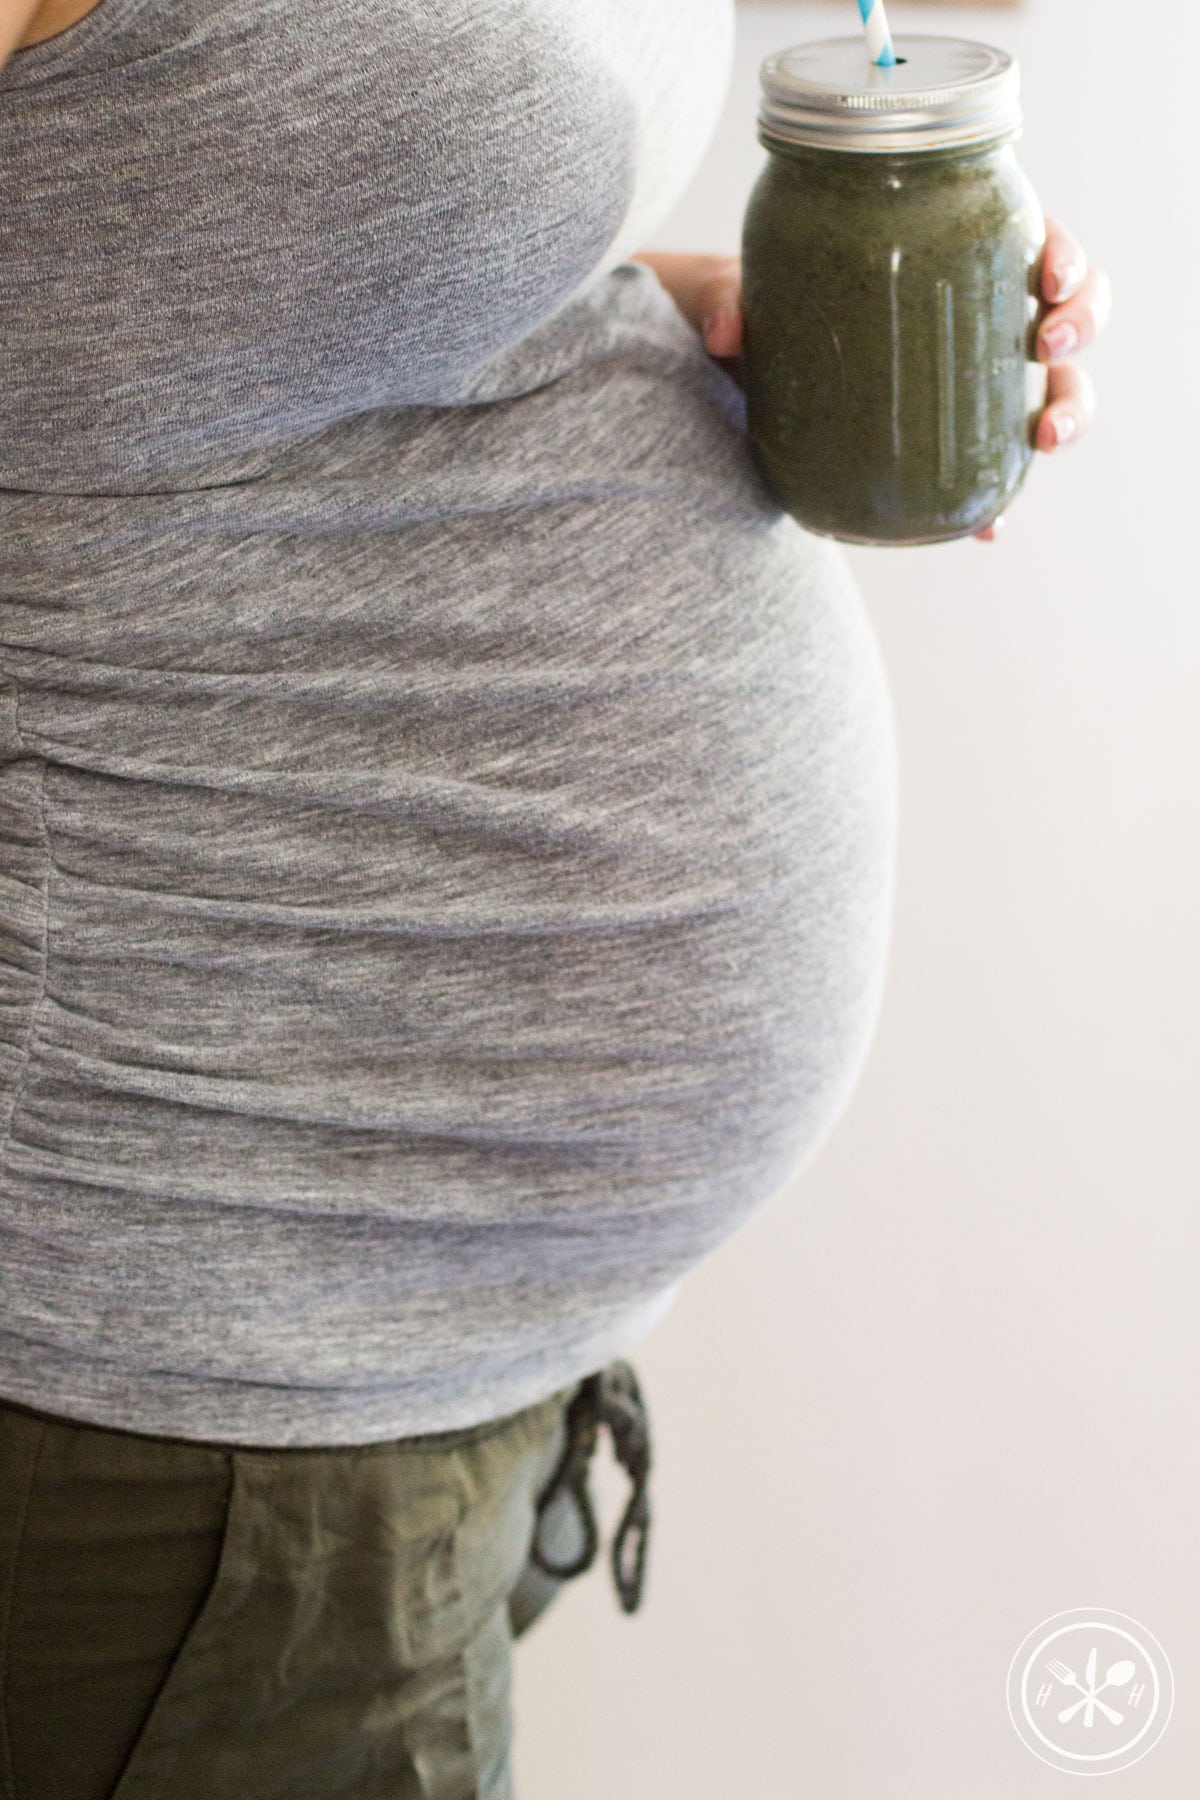 Pregnancy Smoothie Spinach Berry